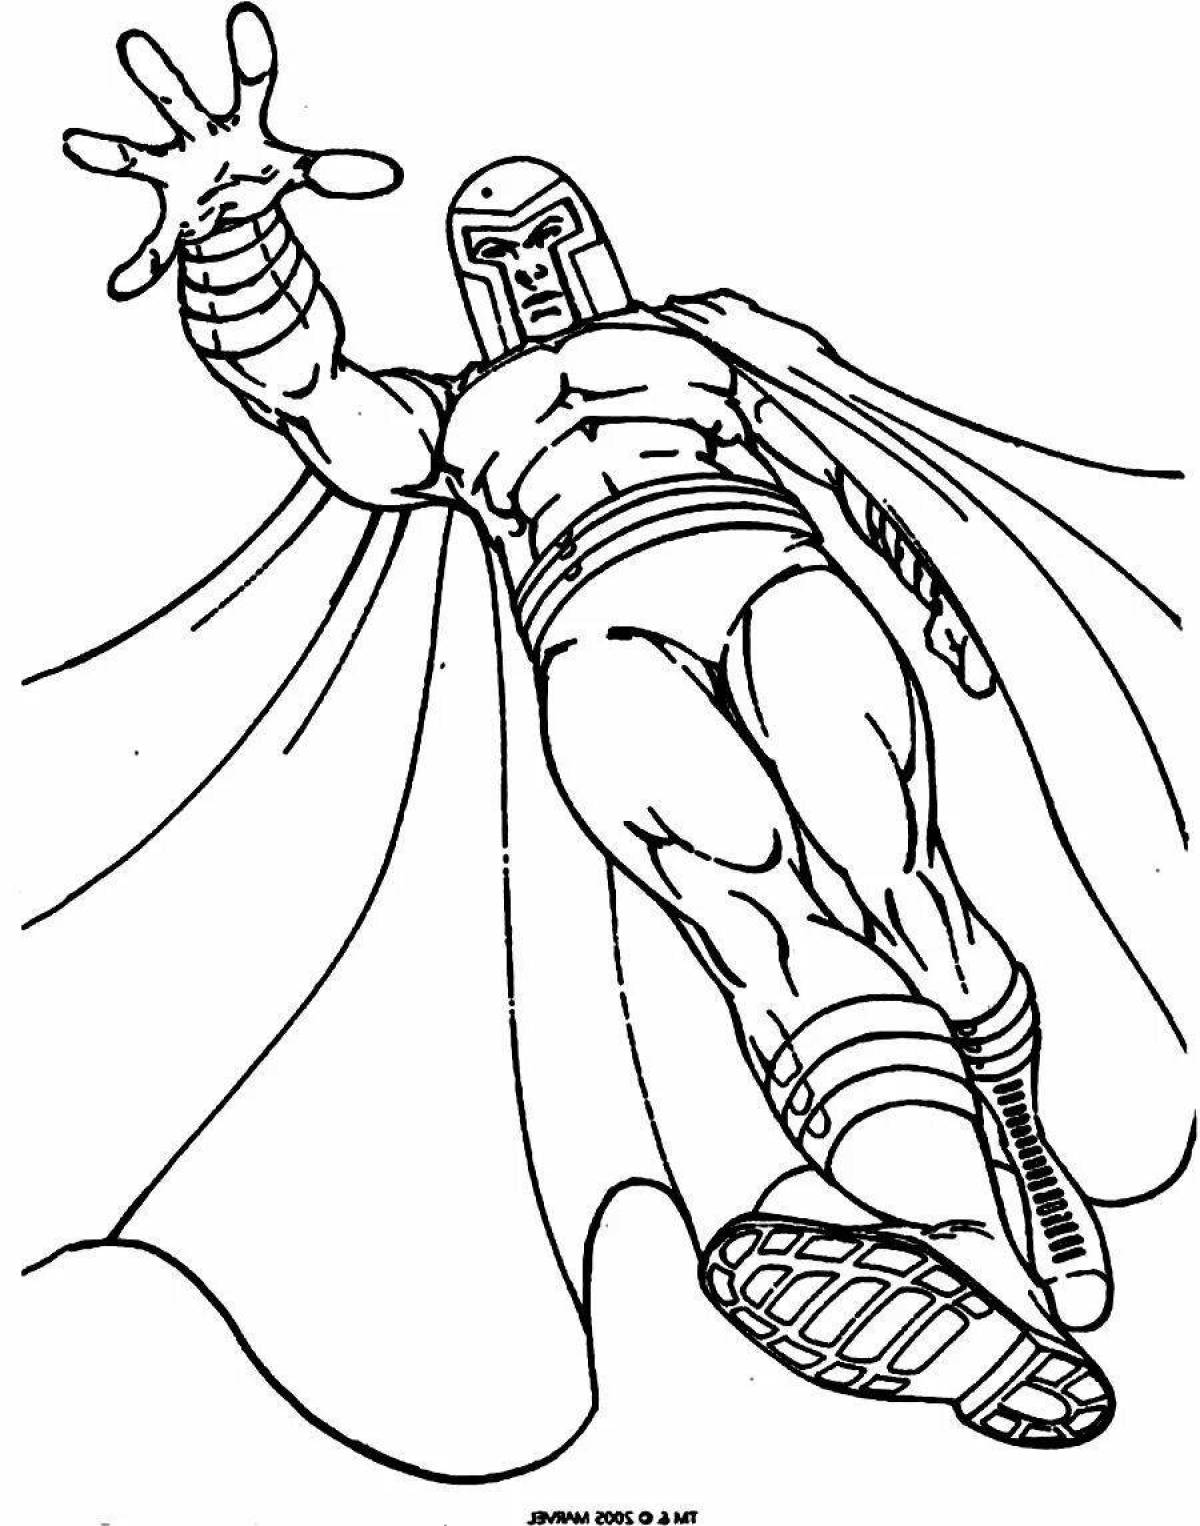 Great supervillain coloring book